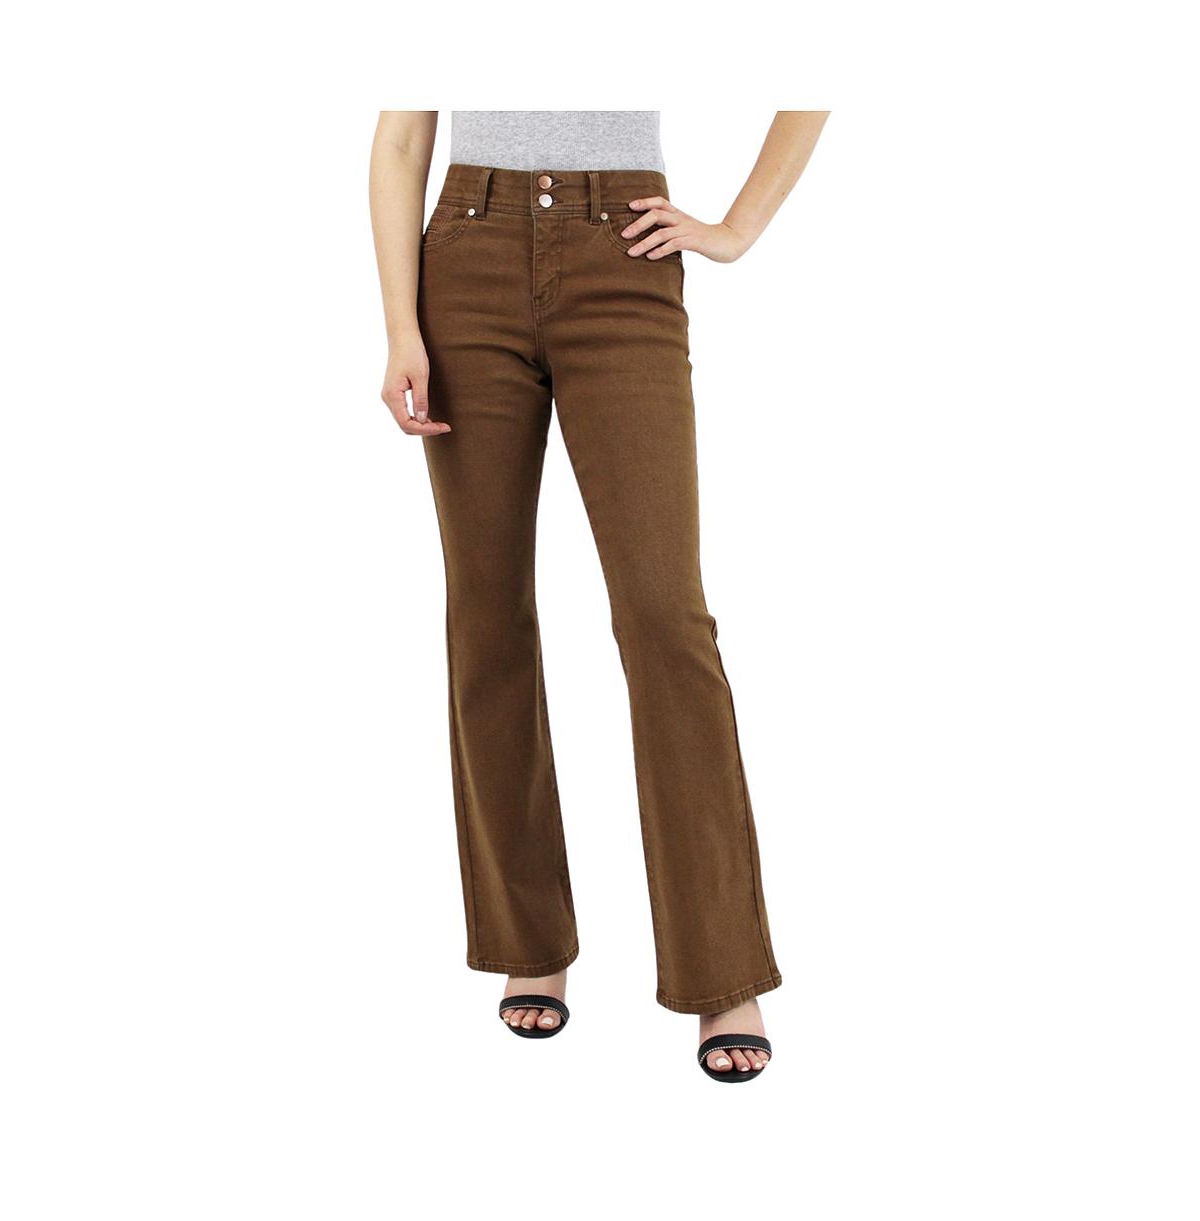 Women's Mocha Two Button Tummy Control Bootcut with Front & Back Pocket Detail Jeans - Mocha